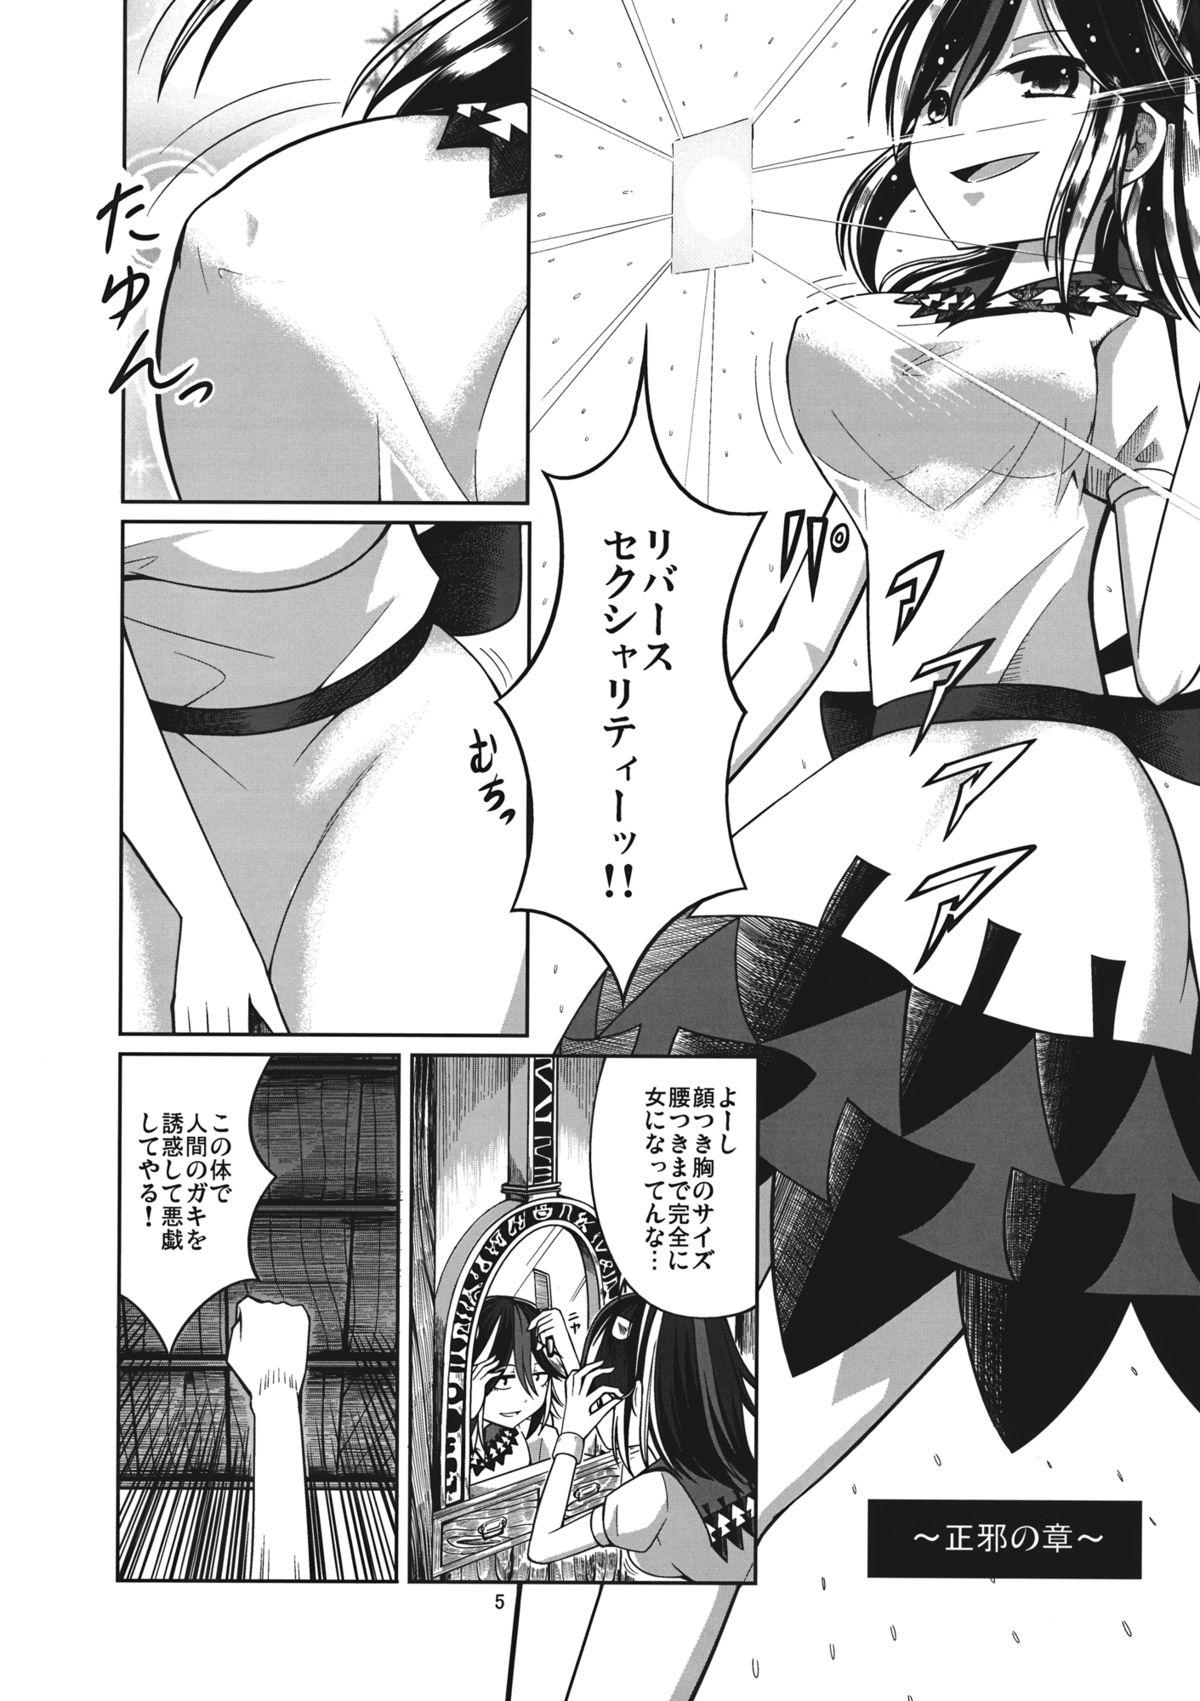 Speculum Reverse Sexuality - Touhou project Flash - Page 4